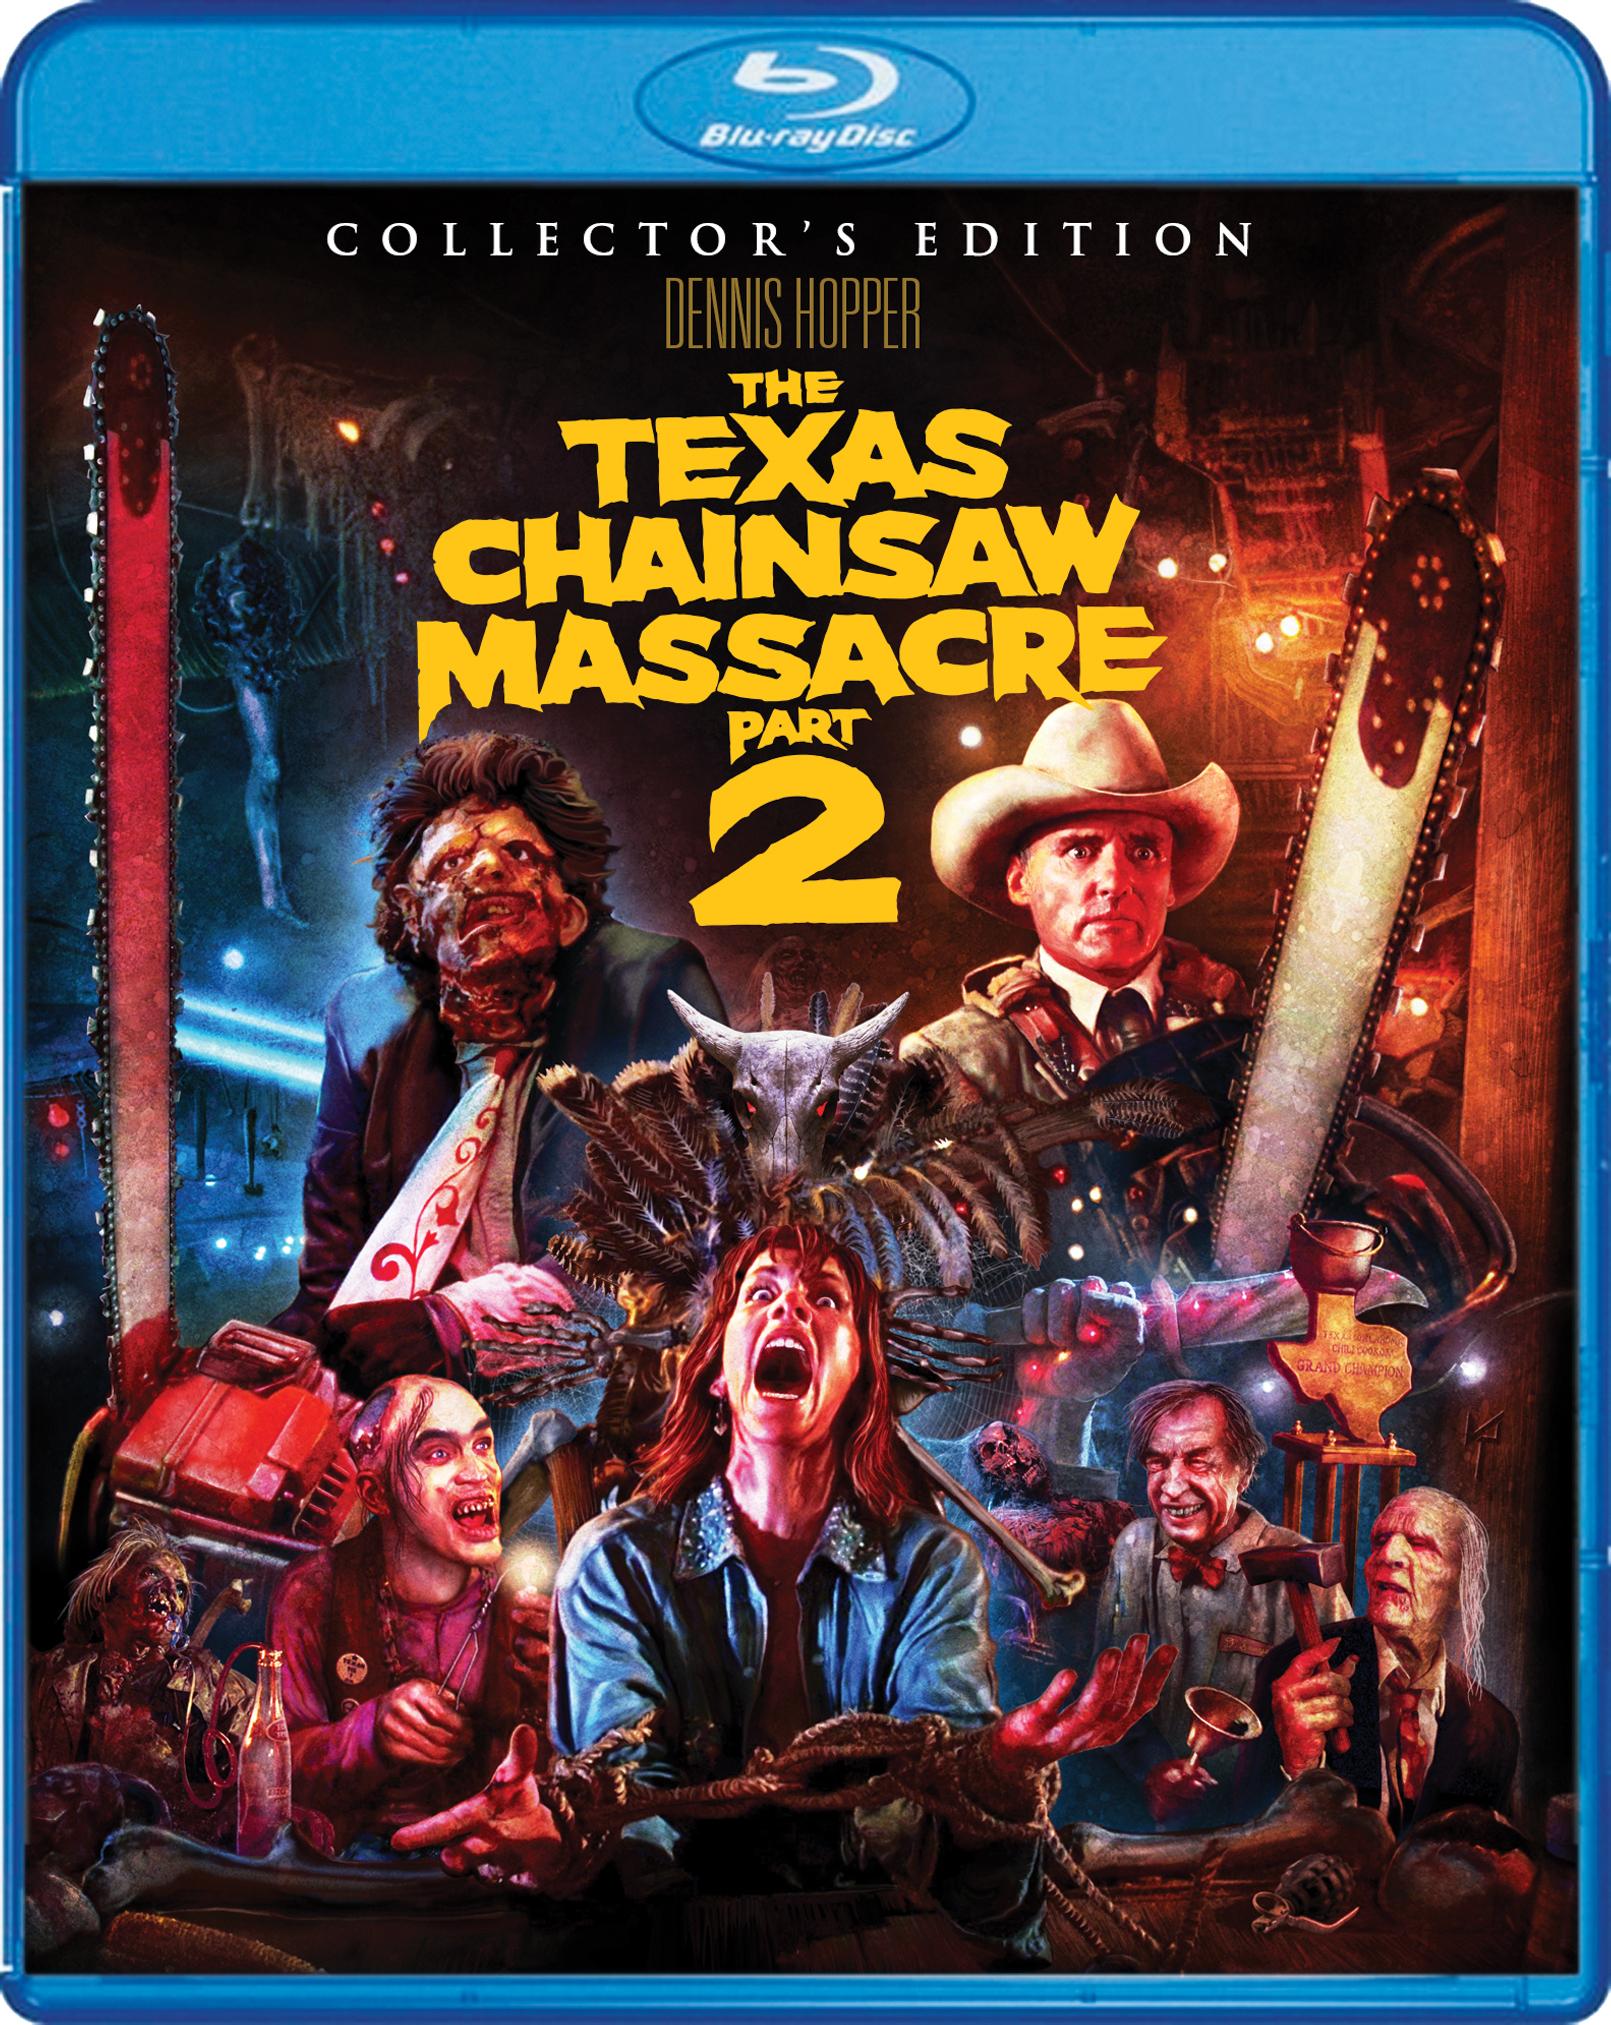 [Blu-Ray Review] ‘The Texas Chainsaw Massacre 2’: Arriving On Collector’s Edition 2-Disc Blu-ray April 19, 2016 From Scream Factory 5